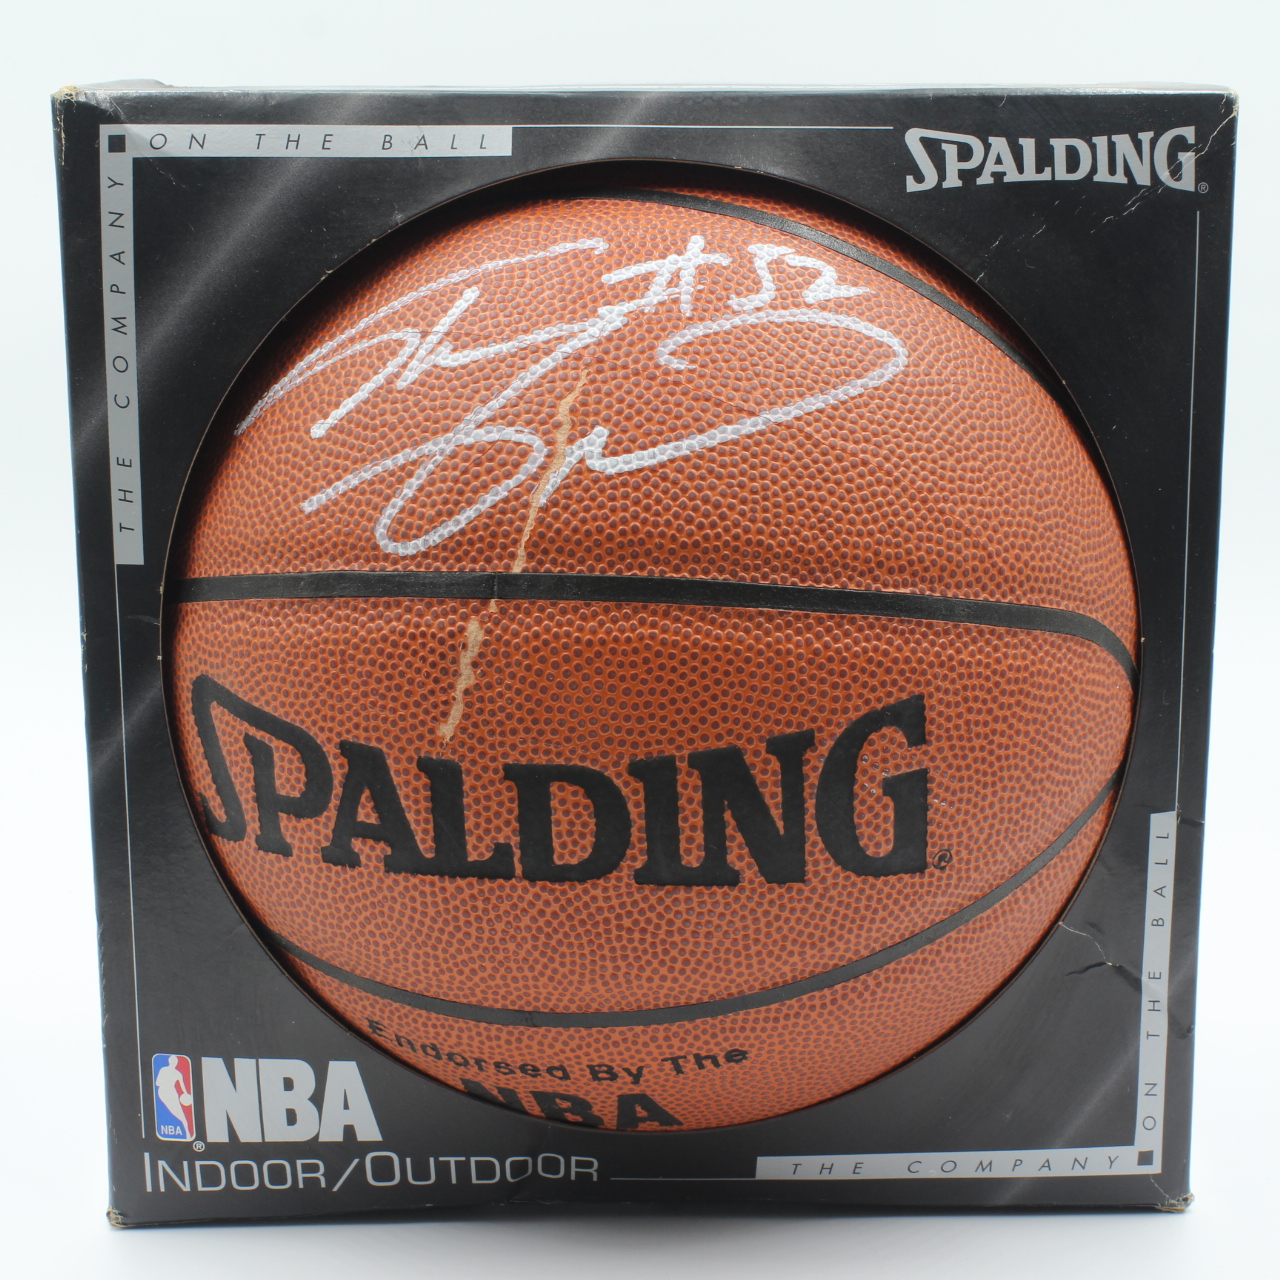  C. 1994 Autographed Basketball, Shaquille O'Neal